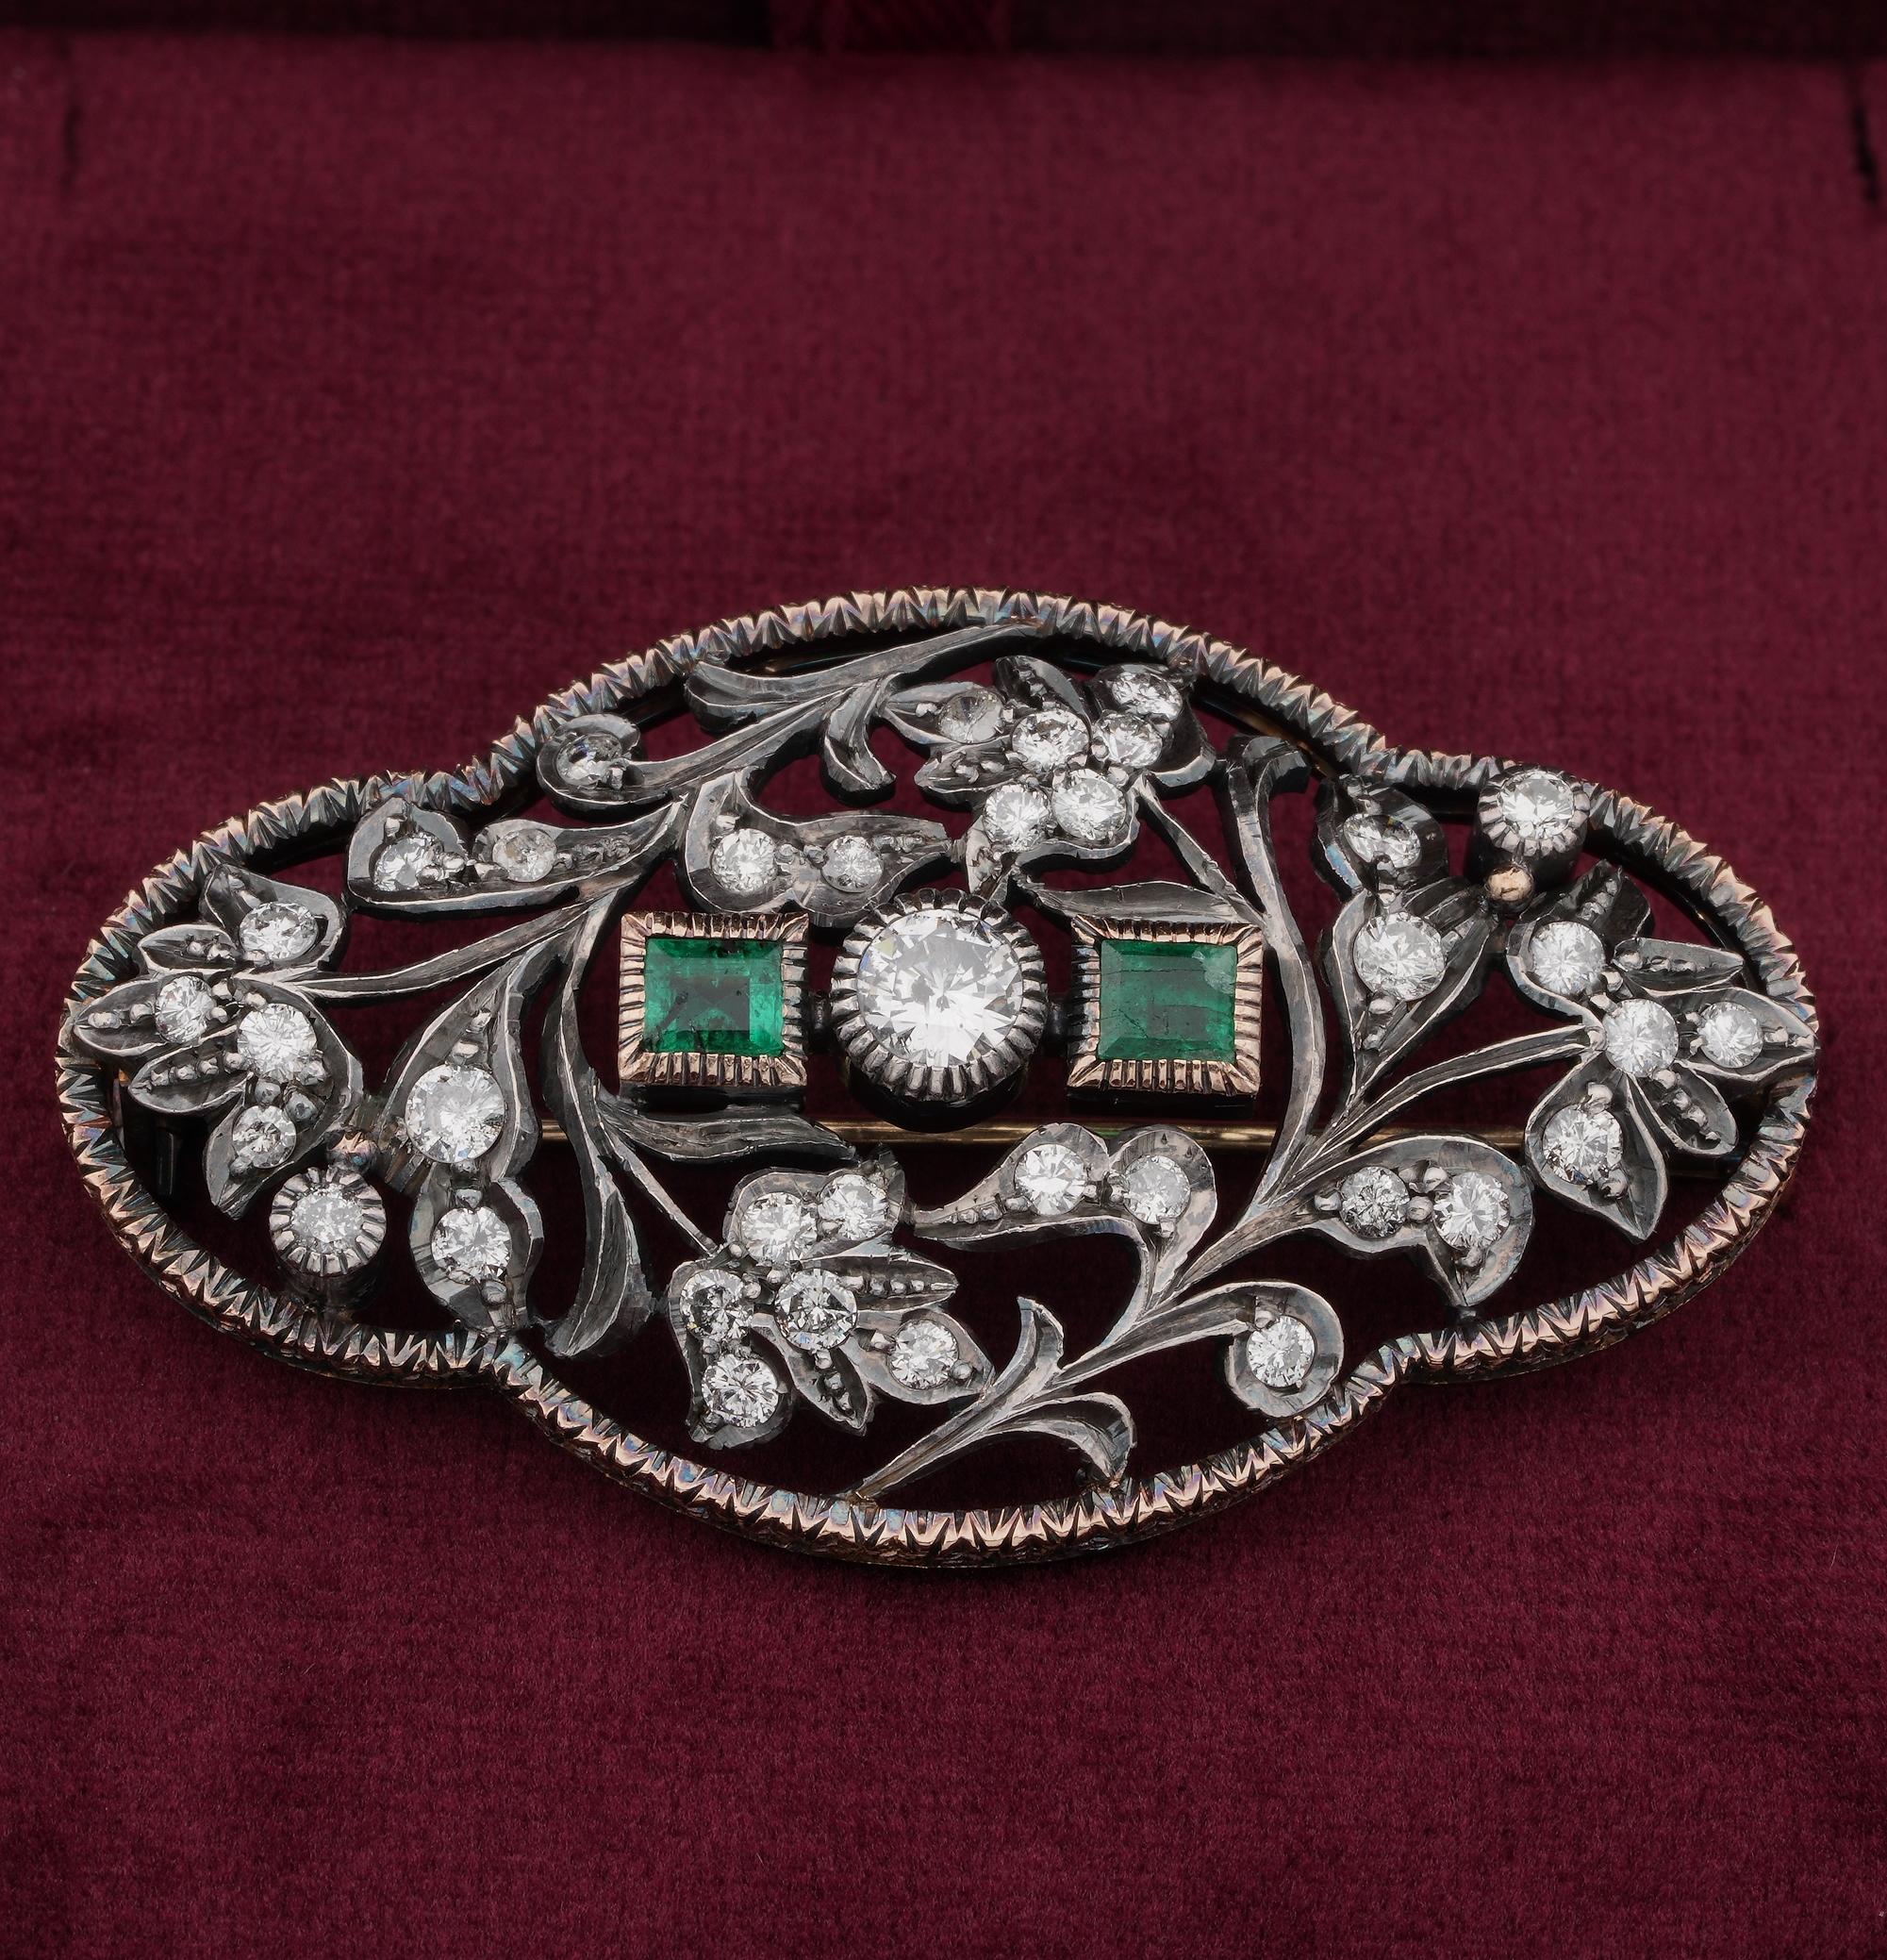 Signature of Past Times

An original 1935 Art Deco Diamond and Emerald panel Brooch
Large and remarkable displaying Diamonds and Emeralds among a tridimensional foliate work
Hand crafted of solid 18 KT gold with silver portions- marked
Set